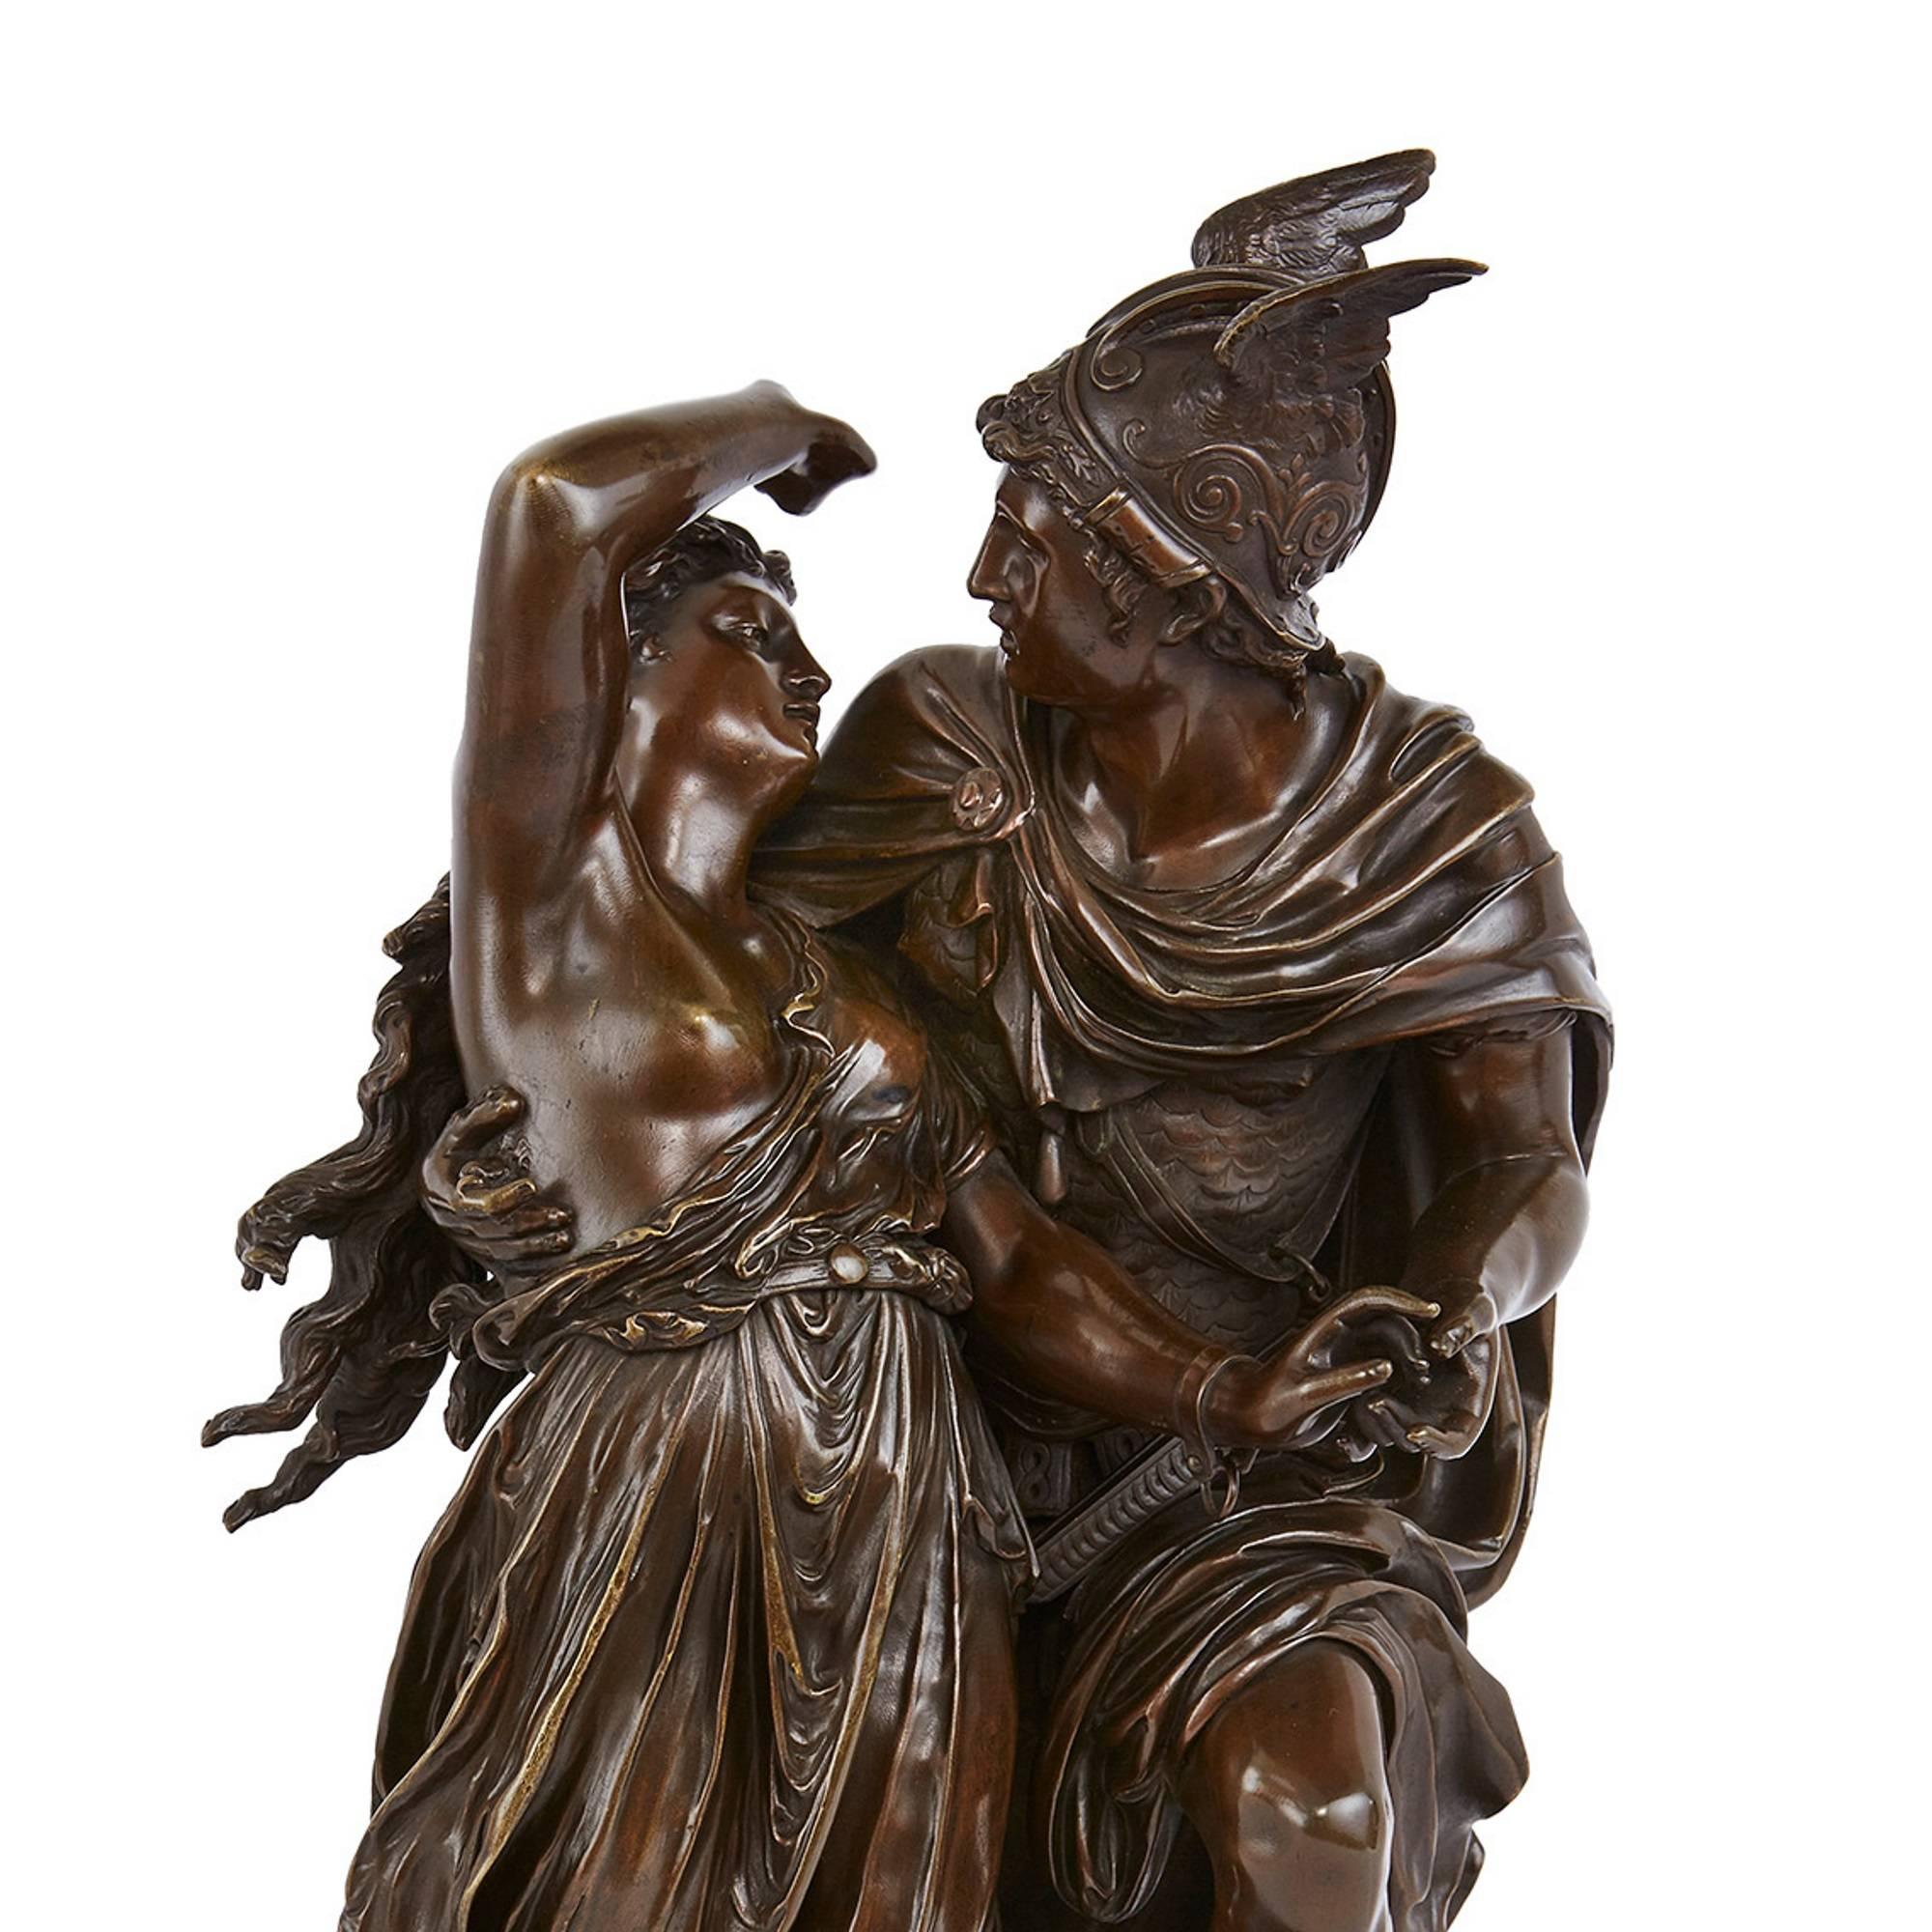 This fine antique French sculpture depicts a moment from one of the most famous tales from Classical mythology, that of Perseus and Andromeda. Made of patinated bronze and featuring parcel-gilt highlights, the work shows the moment of Andromeda's